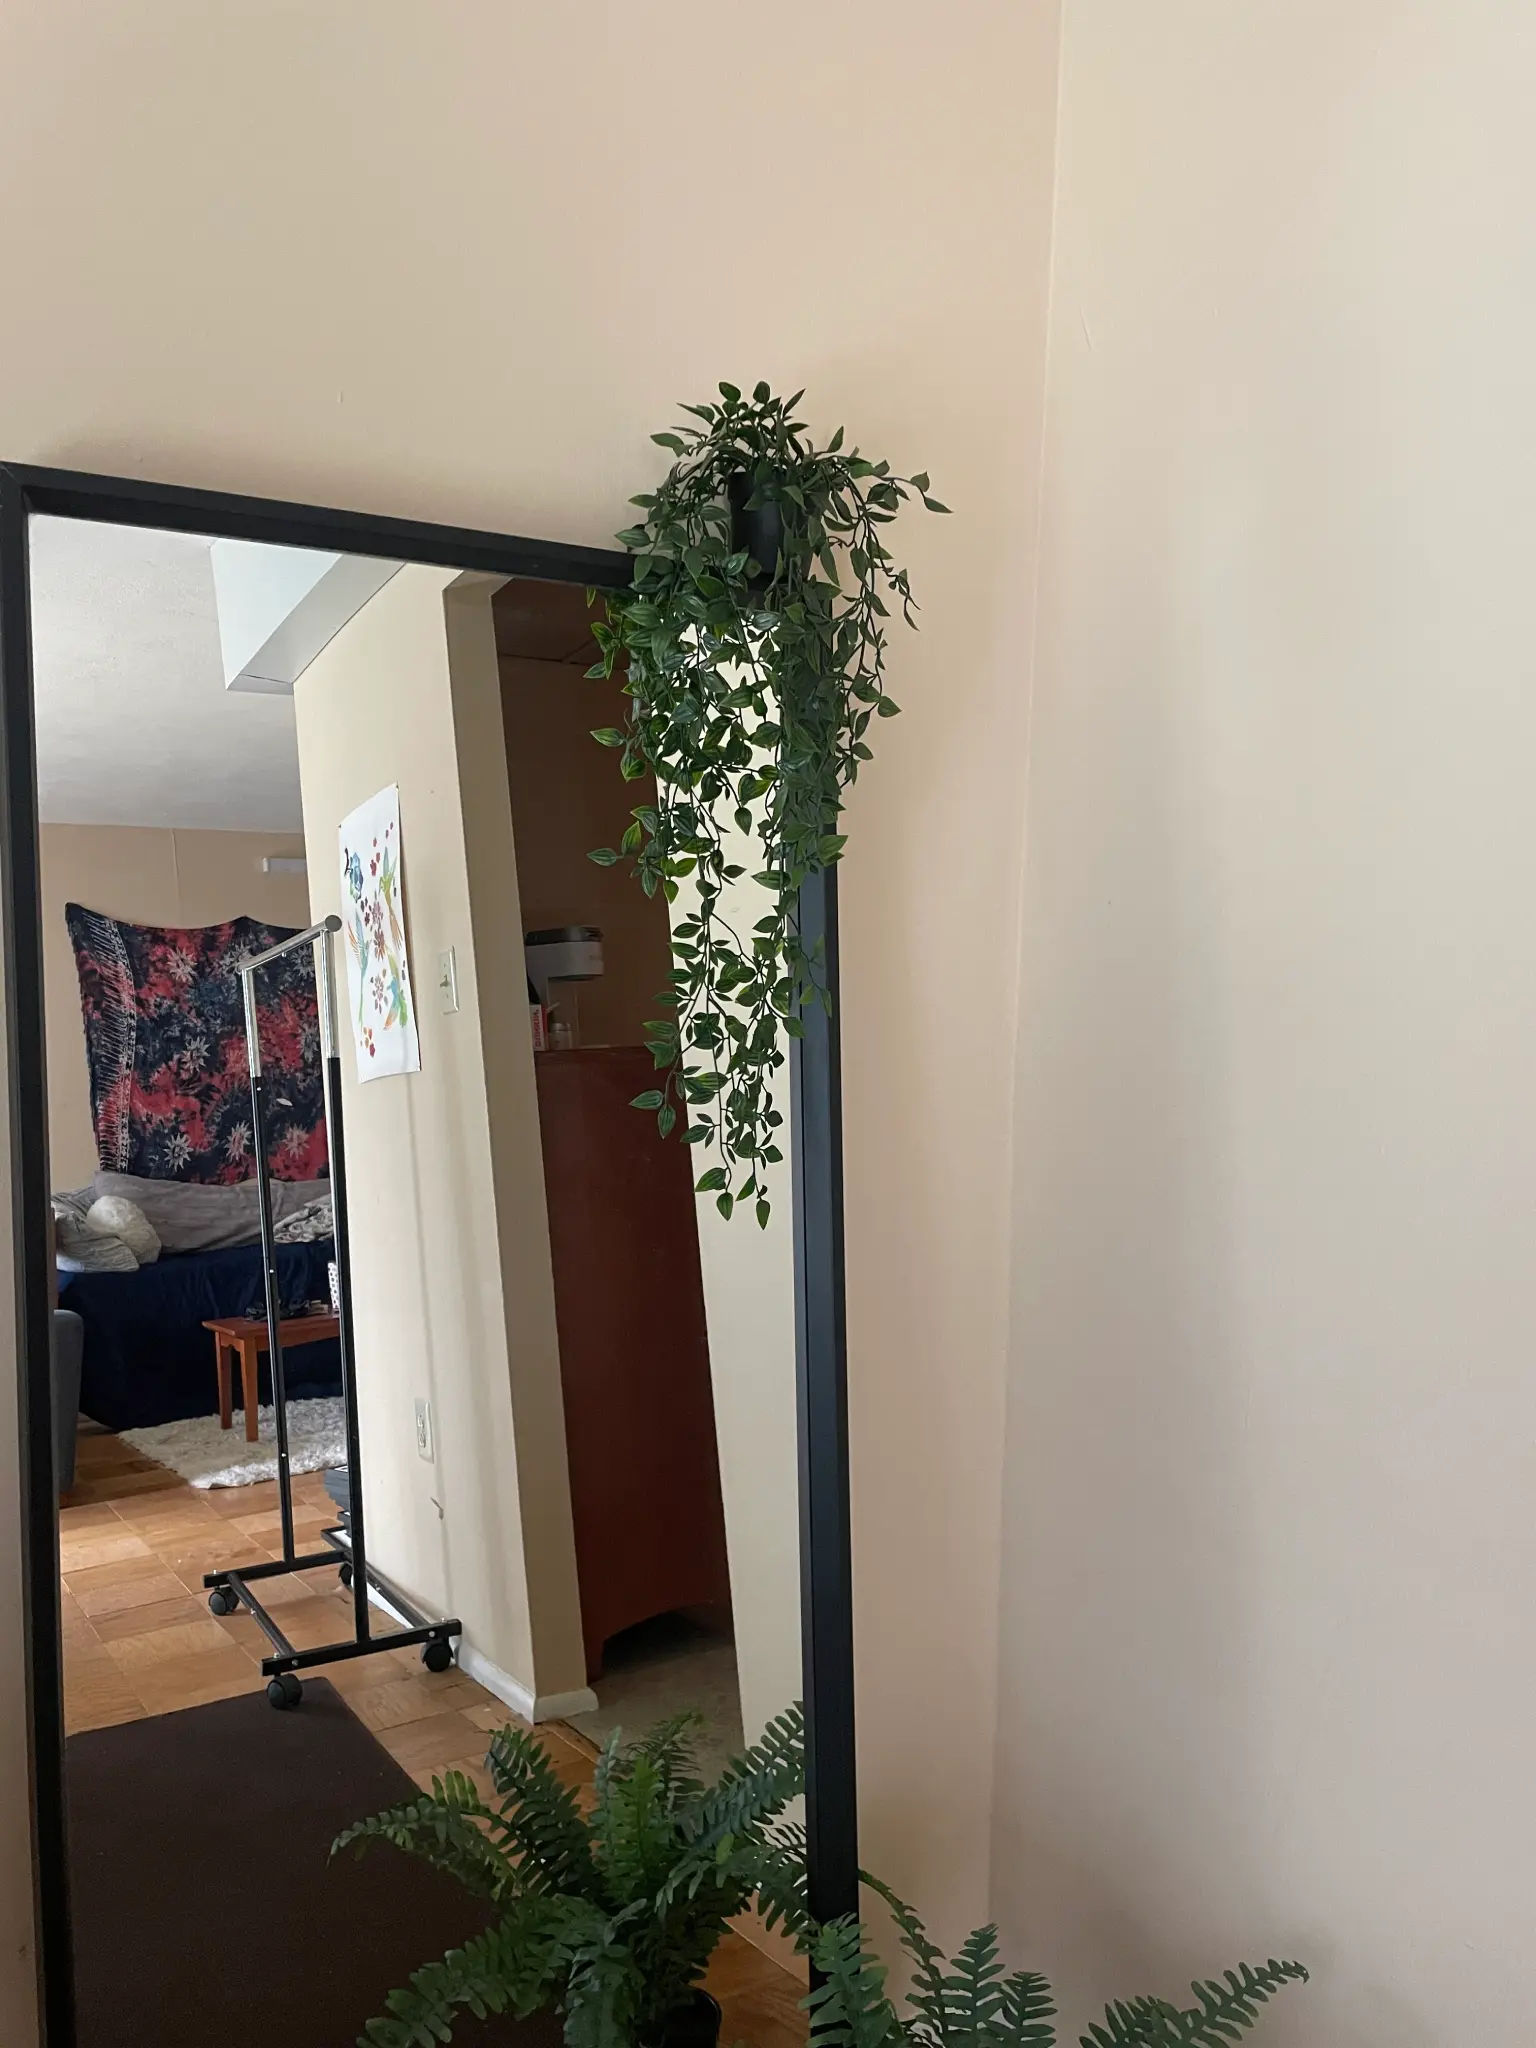 A mirror showing part of a room.